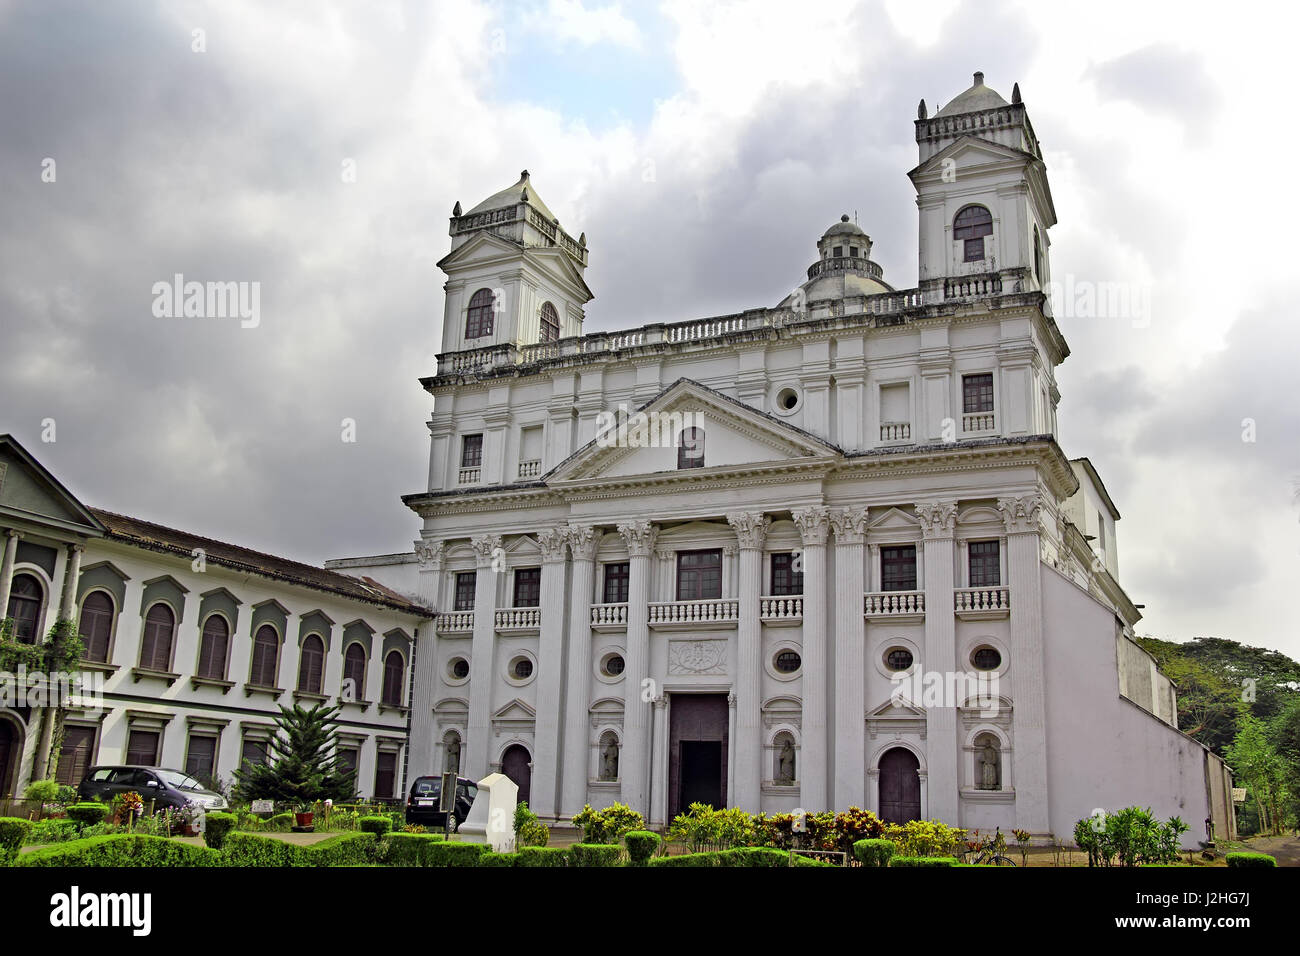 The facade of the Church of St. Cajetan in Old Goa, India, a 17 th century church in Corinthian style that mimic the design of St. Peter’s Basilica Stock Photo